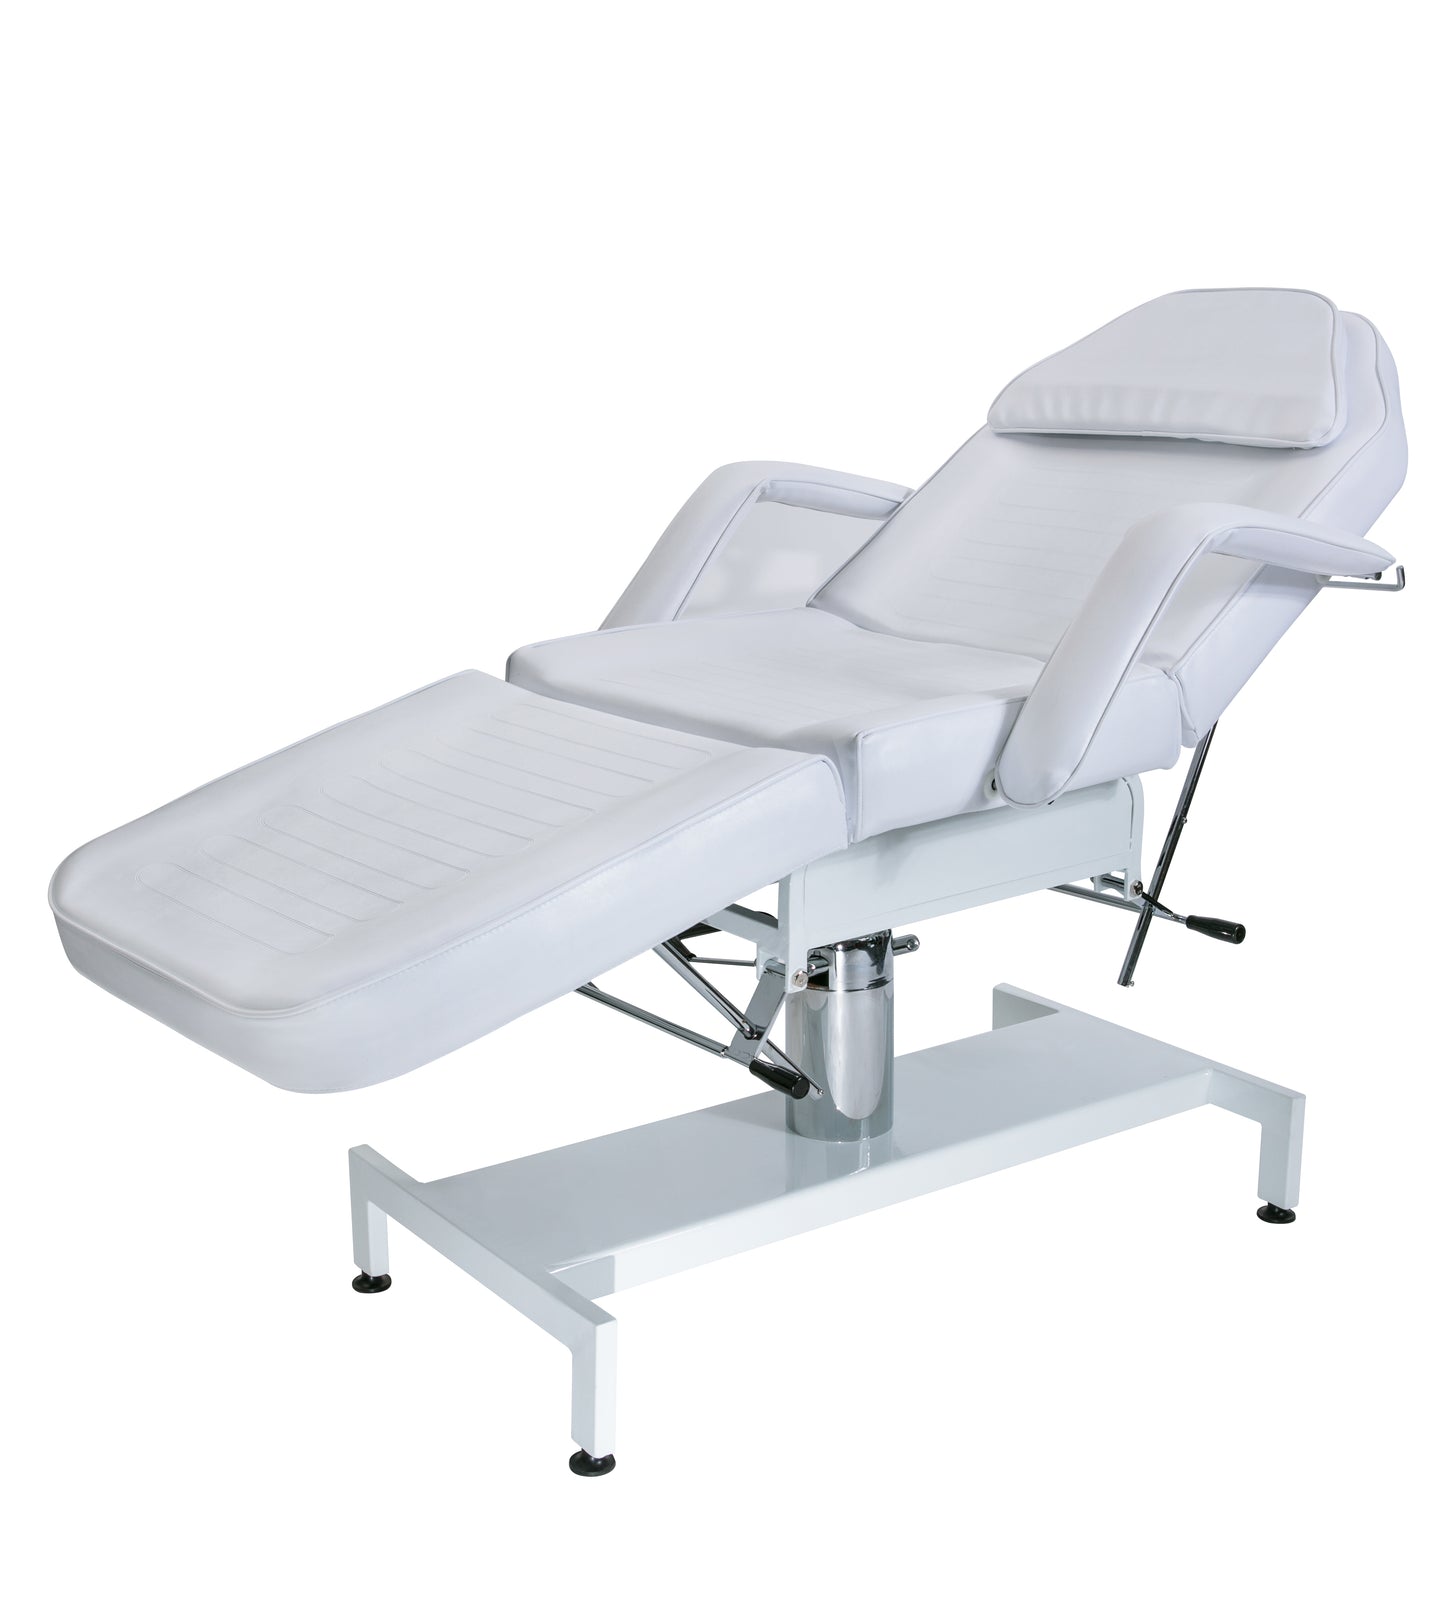 HYDRAULIC MASSAGE BED 822 (MORE STYLES AVAILABLE)